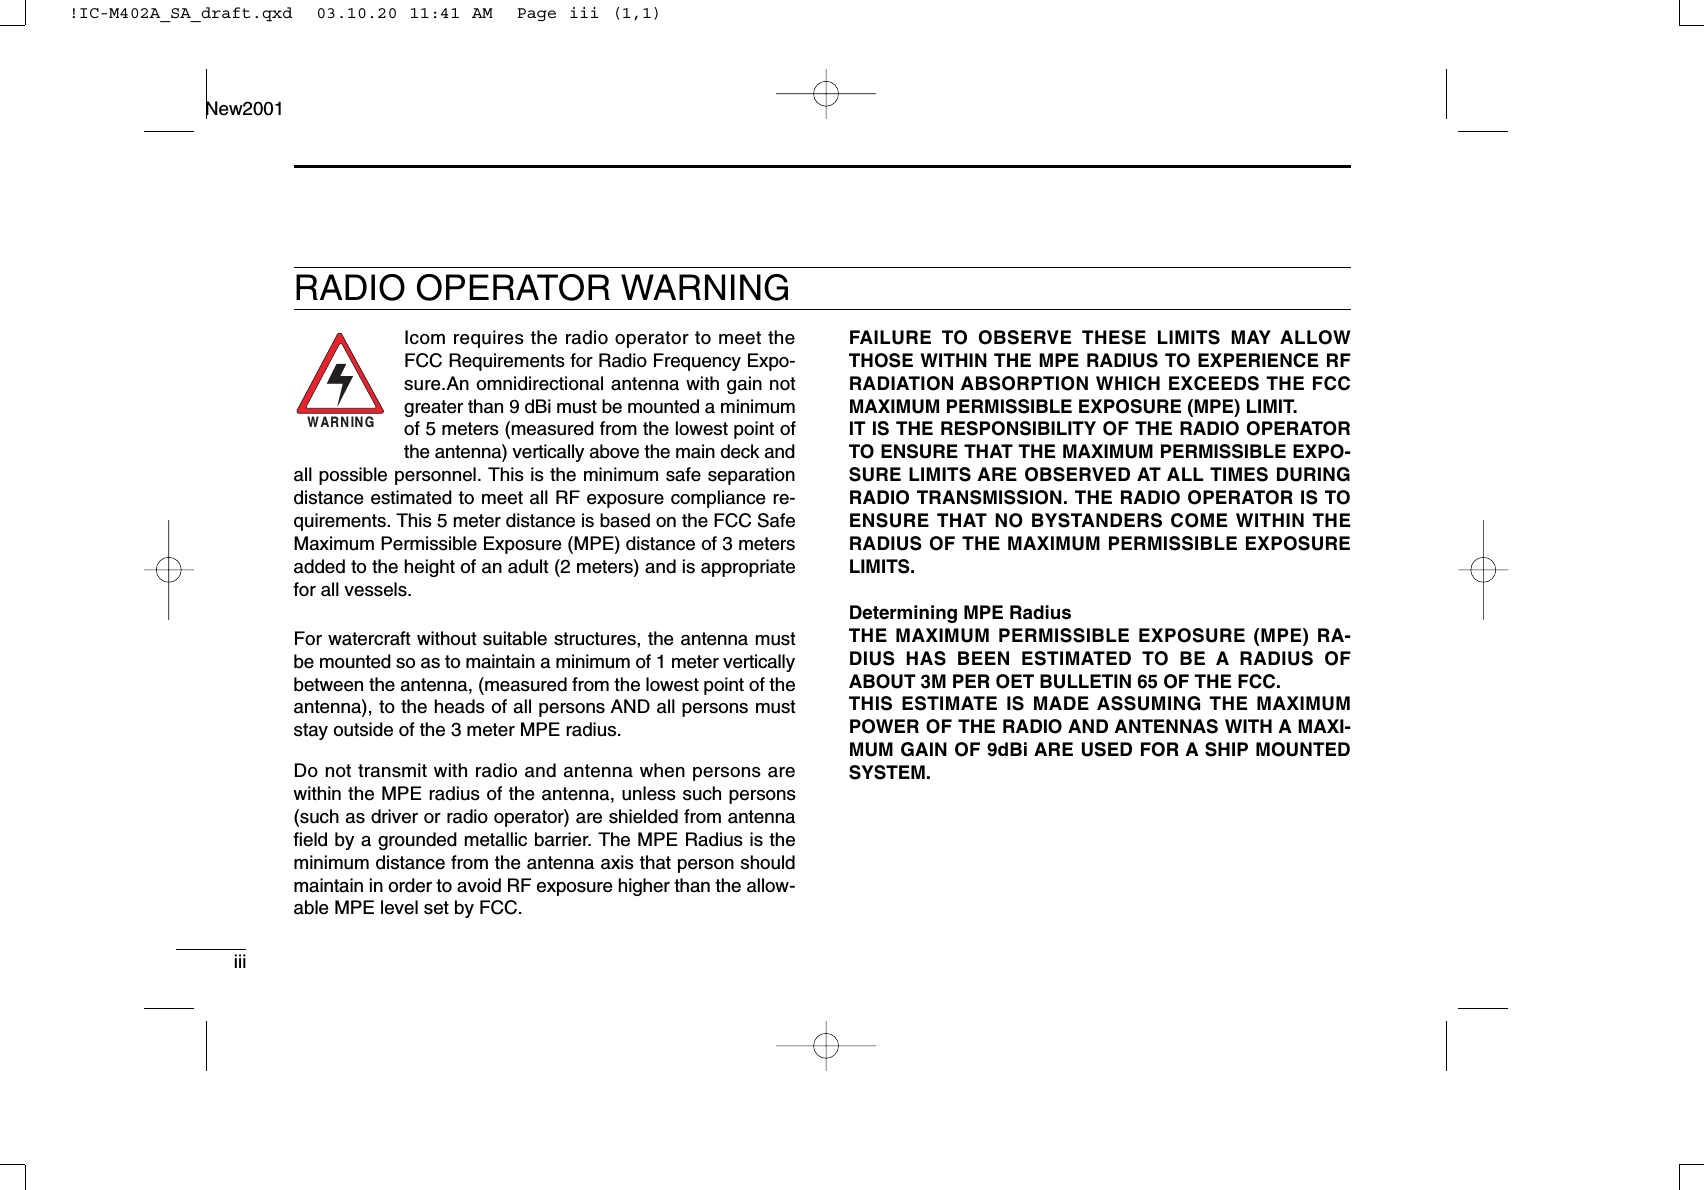 iiiNew2001RADIO OPERATOR WARNINGIcom requires the radio operator to meet theFCC Requirements for Radio Frequency Expo-sure.An omnidirectional antenna with gain notgreater than 9 dBi must be mounted a minimumof 5 meters (measured from the lowest point ofthe antenna) vertically above the main deck andall possible personnel. This is the minimum safe separationdistance estimated to meet all RF exposure compliance re-quirements. This 5 meter distance is based on the FCC SafeMaximum Permissible Exposure (MPE) distance of 3 metersadded to the height of an adult (2 meters) and is appropriatefor all vessels.For watercraft without suitable structures, the antenna mustbe mounted so as to maintain a minimum of 1 meter verticallybetween the antenna, (measured from the lowest point of theantenna), to the heads of all persons AND all persons muststay outside of the 3 meter MPE radius.Do not transmit with radio and antenna when persons arewithin the MPE radius of the antenna, unless such persons(such as driver or radio operator) are shielded from antennaﬁeld by a grounded metallic barrier. The MPE Radius is theminimum distance from the antenna axis that person shouldmaintain in order to avoid RF exposure higher than the allow-able MPE level set by FCC.WARNINGFAILURE TO OBSERVE THESE LIMITS MAY ALLOWTHOSE WITHIN THE MPE RADIUS TO EXPERIENCE RFRADIATION ABSORPTION WHICH EXCEEDS THE FCCMAXIMUM PERMISSIBLE EXPOSURE (MPE) LIMIT.IT IS THE RESPONSIBILITY OF THE RADIO OPERATORTO ENSURE THAT THE MAXIMUM PERMISSIBLE EXPO-SURE LIMITS ARE OBSERVED AT ALL TIMES DURINGRADIO TRANSMISSION. THE RADIO OPERATOR IS TOENSURE THAT NO BYSTANDERS COME WITHIN THERADIUS OF THE MAXIMUM PERMISSIBLE EXPOSURELIMITS.Determining MPE RadiusTHE MAXIMUM PERMISSIBLE EXPOSURE (MPE) RA-DIUS HAS BEEN ESTIMATED TO BE A RADIUS OFABOUT 3M PER OET BULLETIN 65 OF THE FCC.THIS ESTIMATE IS MADE ASSUMING THE MAXIMUMPOWER OF THE RADIO AND ANTENNAS WITH A MAXI-MUM GAIN OF 9dBi ARE USED FOR A SHIP MOUNTEDSYSTEM.!IC-M402A_SA_draft.qxd  03.10.20 11:41 AM  Page iii (1,1)